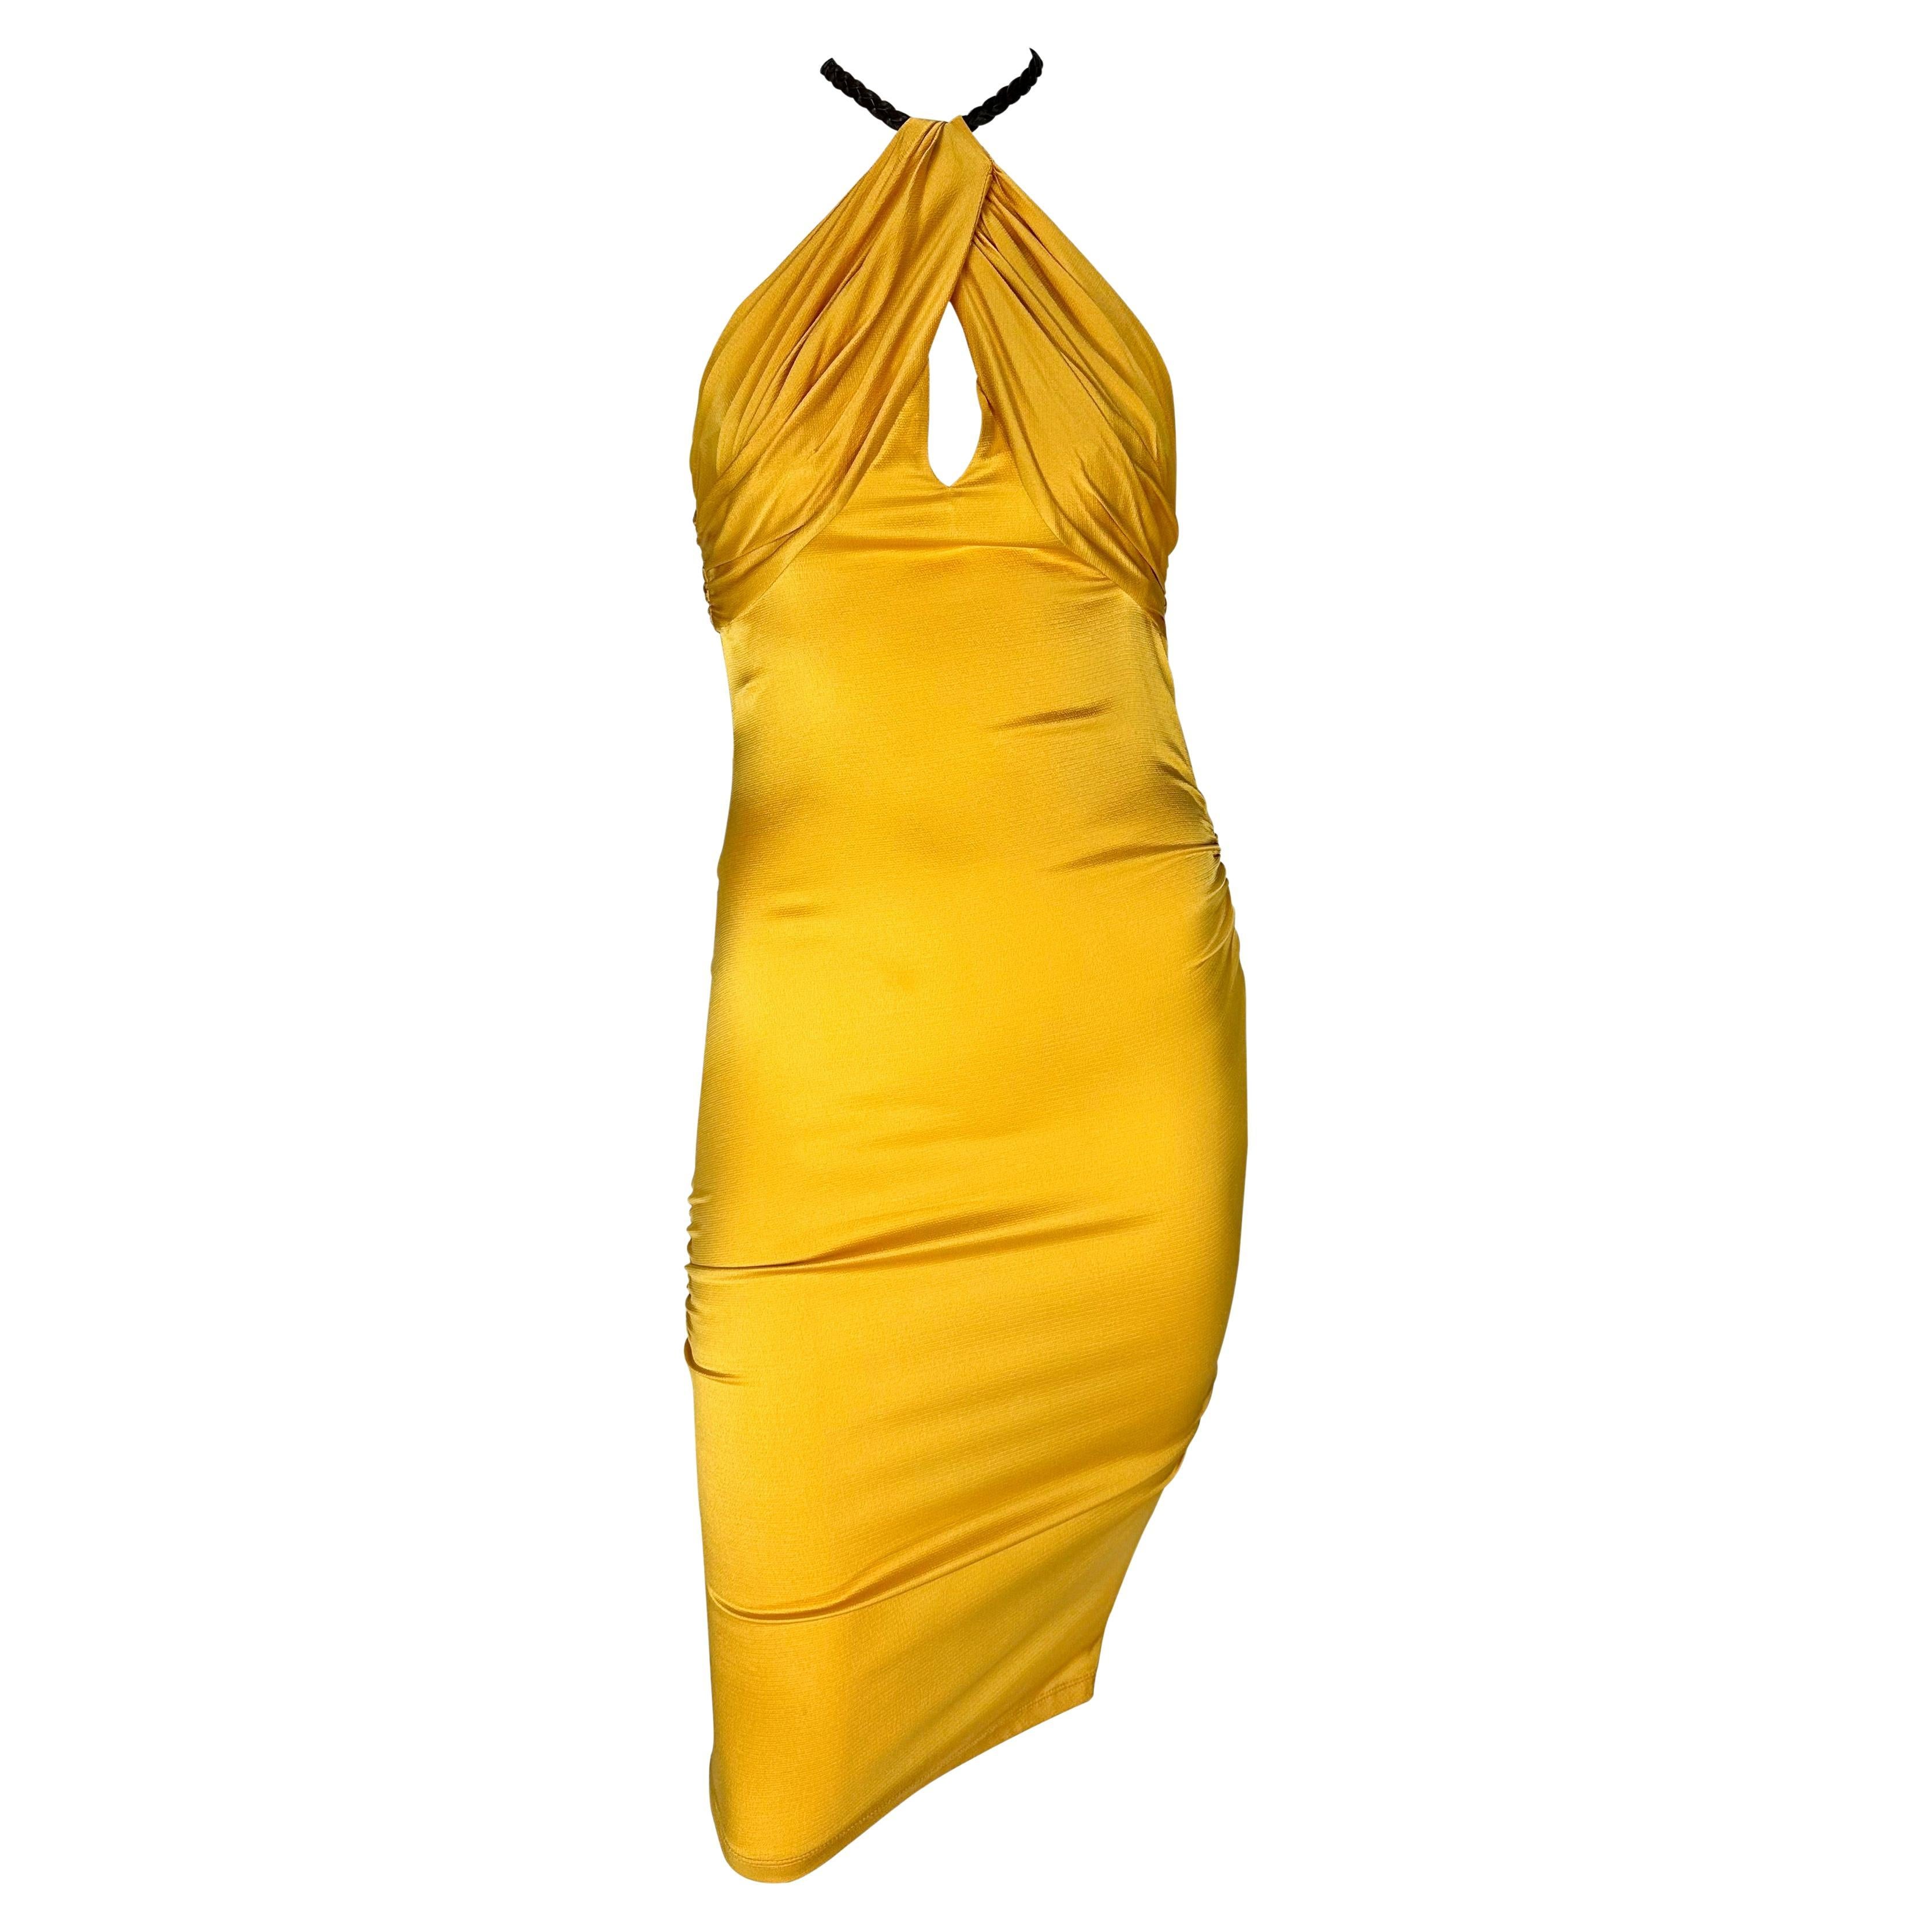 S/S 2005 Gucci Beyoncé Marigold Yellow Ruched Satin Braided Leather Halter Dress For Sale